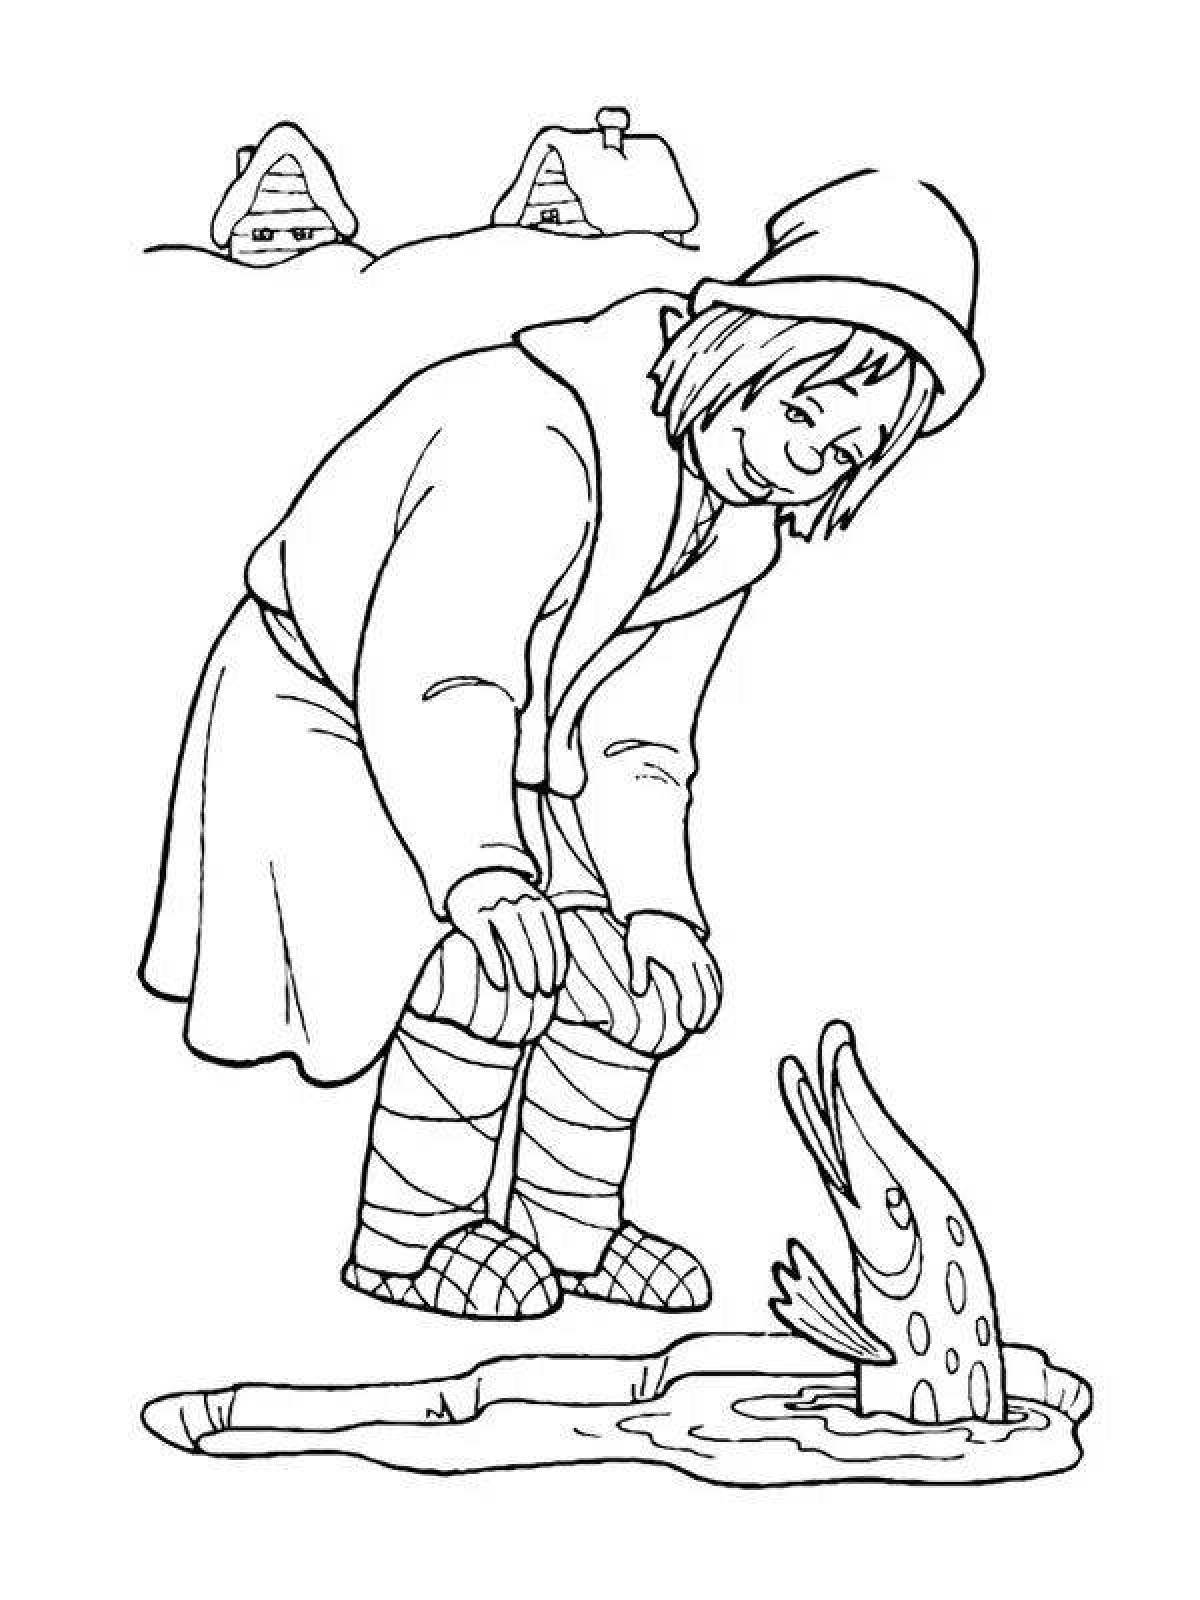 Dreamy coloring page fairy tale by pike